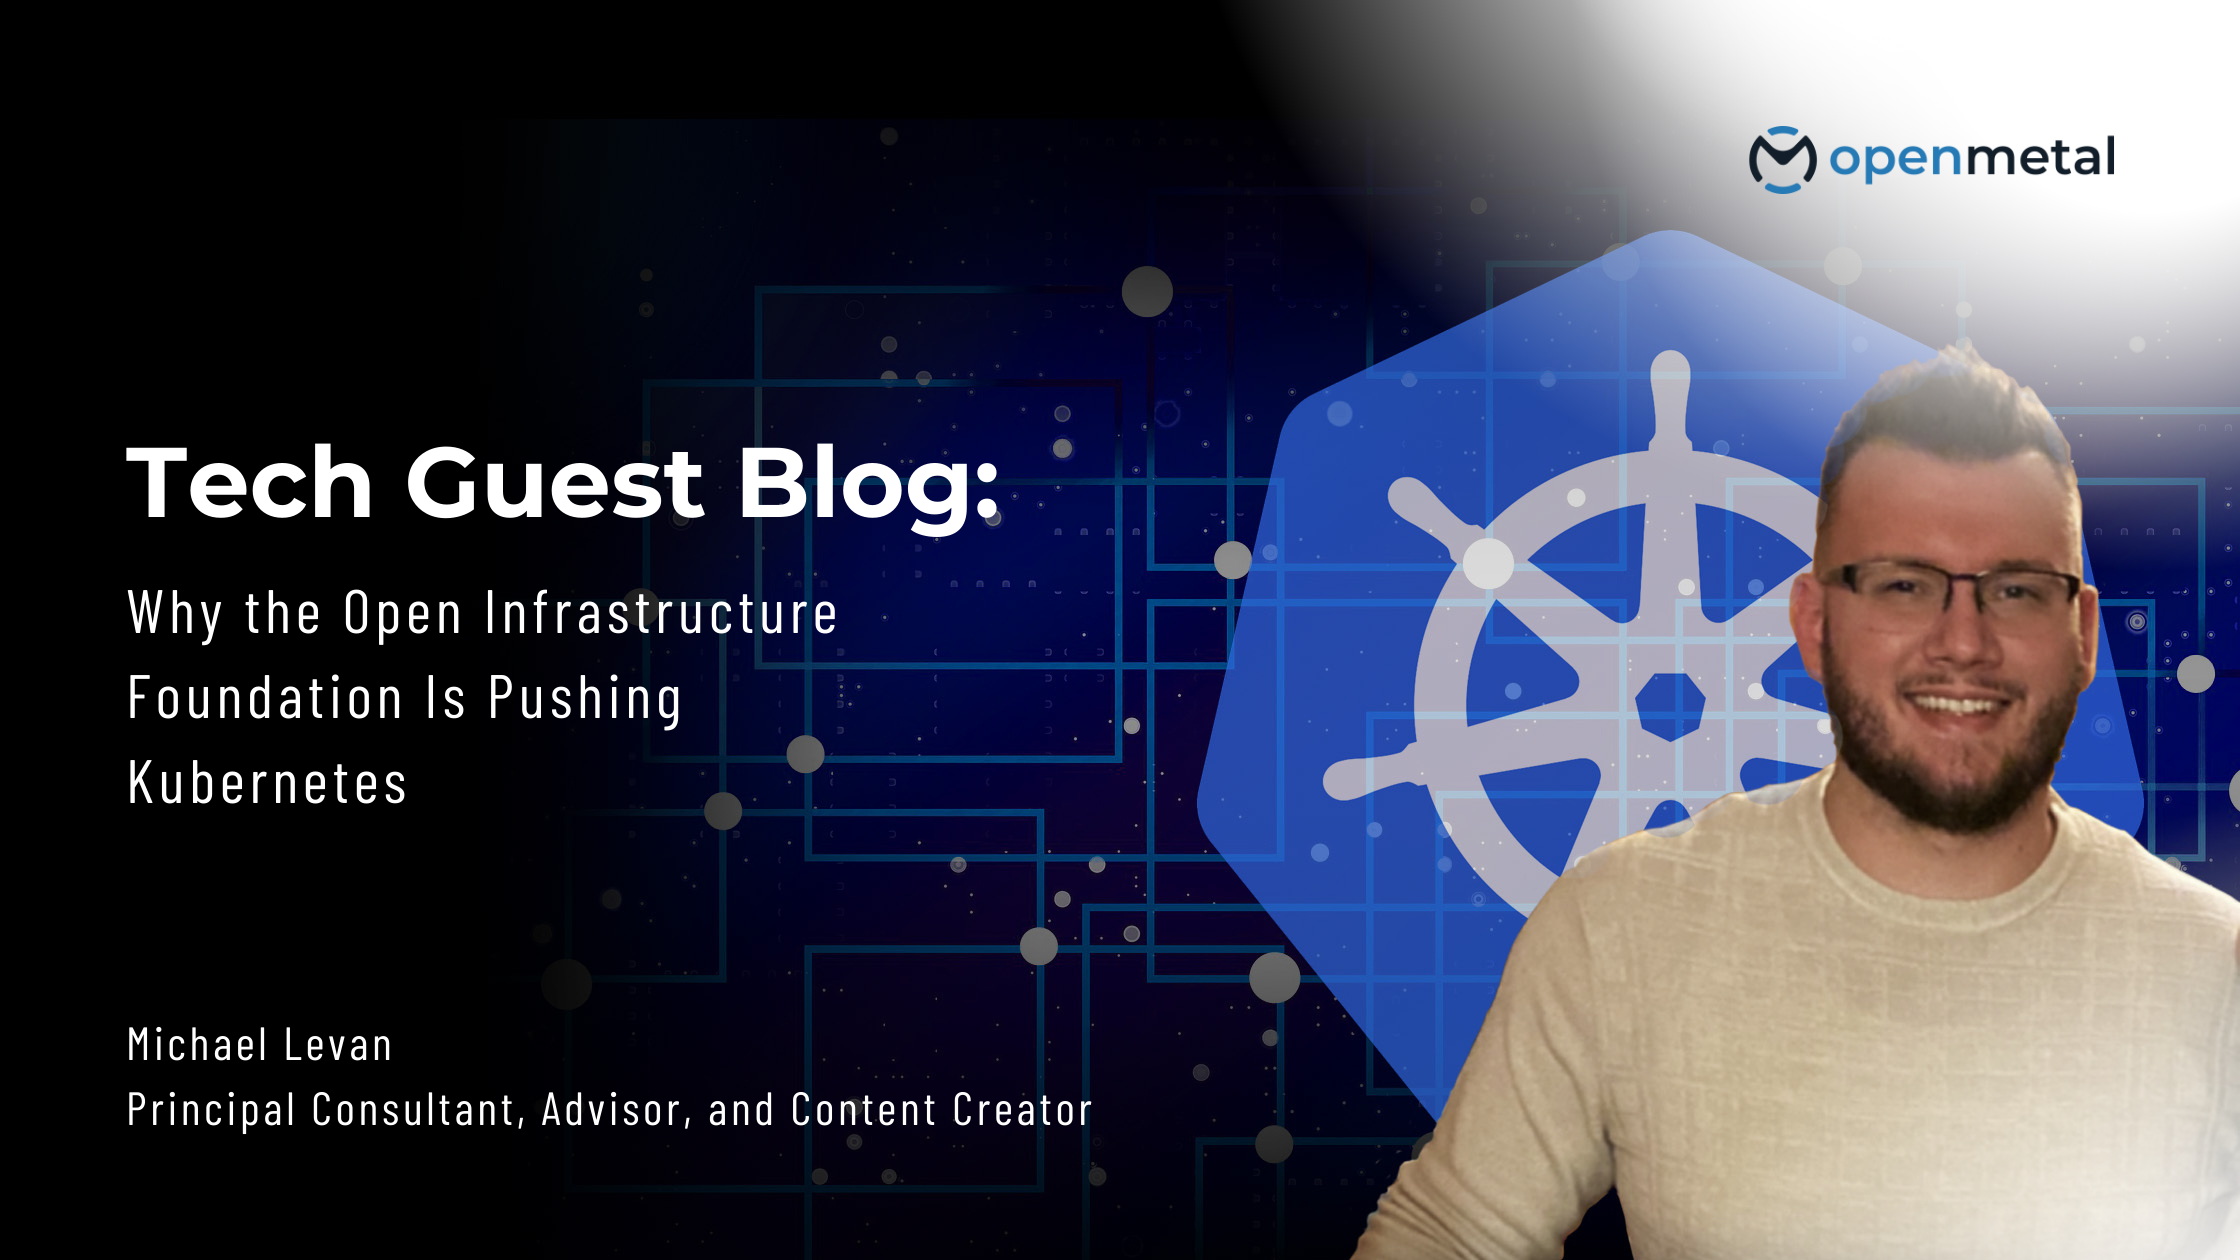 Tech Guest Blog: Why the Open Infrastructure Foundation Is Pushing Kubernetes